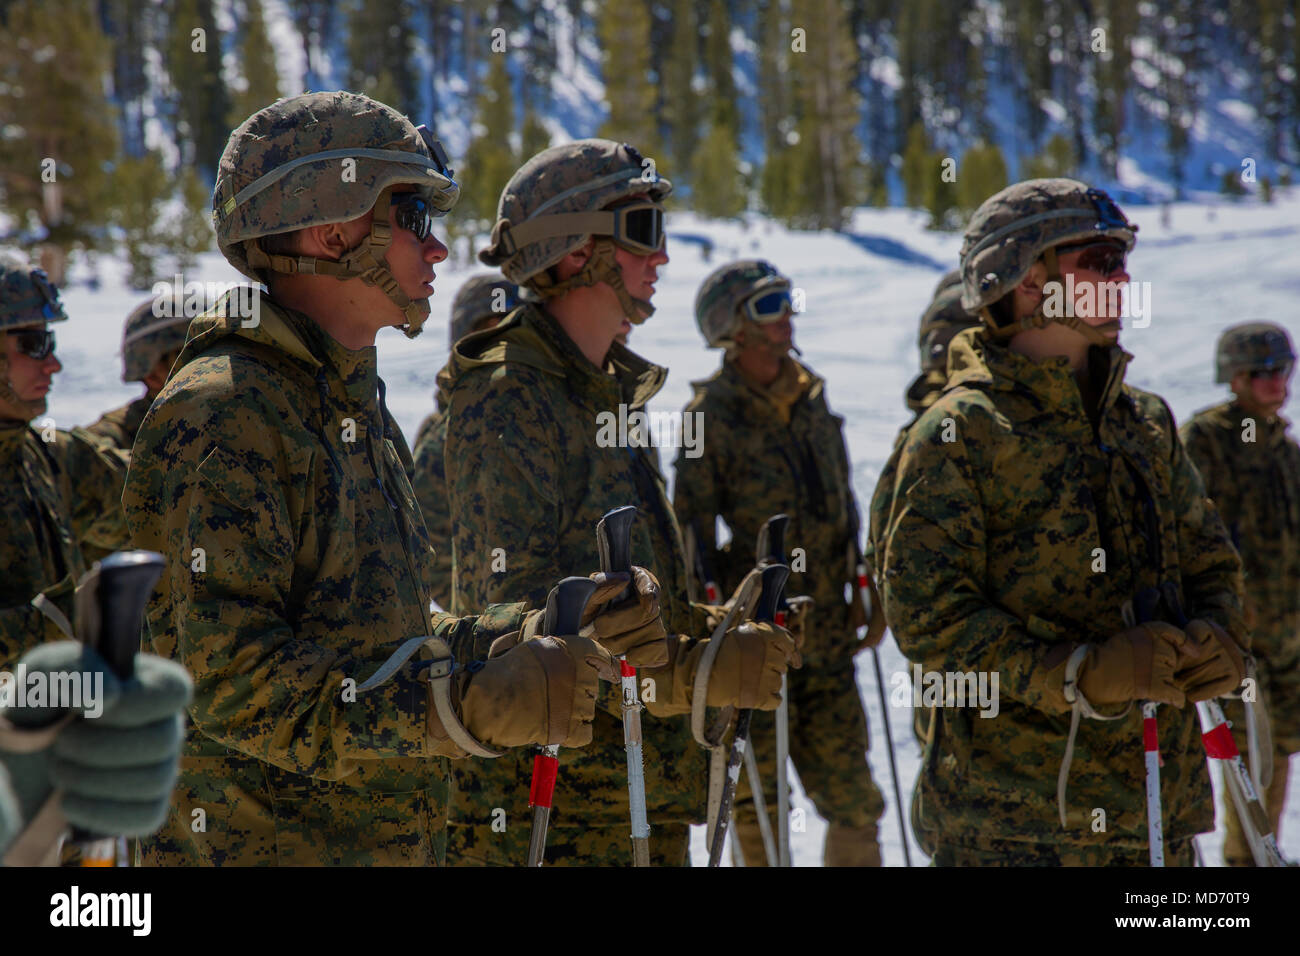 U.S. Marines with India Company, 3rd Battalion, 8th Marine Regiment, 2nd Marine Division, attend a safety brief before skiing during Mountain Training Exercise (MTX) 2-18 at Marine Corps Mountain Warfare Training Center, Bridgeport, CA., March 27, 2018. The Marines participated in a combat readiness evaluation in preparation for an upcoming deployment. (U.S. Marine Corps photo by Cpl. Melanye Martinez) Stock Photo